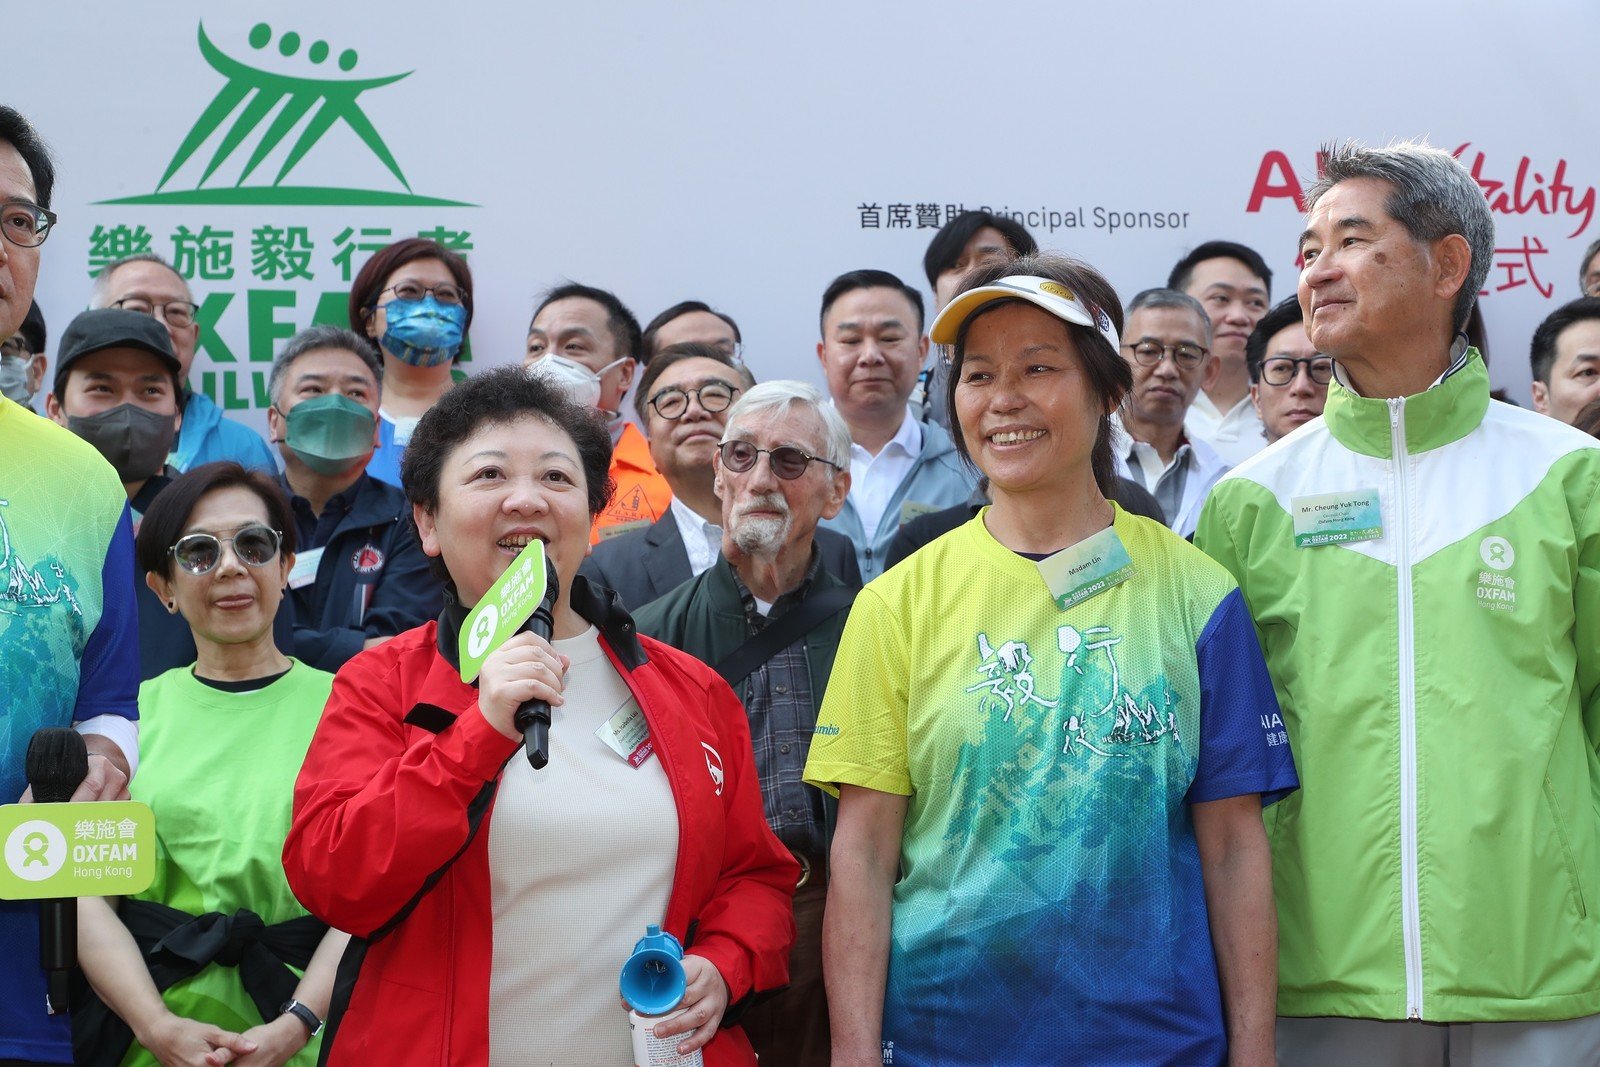 Isabella Lau, Chief Customer, Strategy and Transformation Officer of AIA Hong Kong & Macau (OTW’s Principal Sponsor), giving a speech at the Oxfam Trailwalker 2022 kick-off ceremony. 